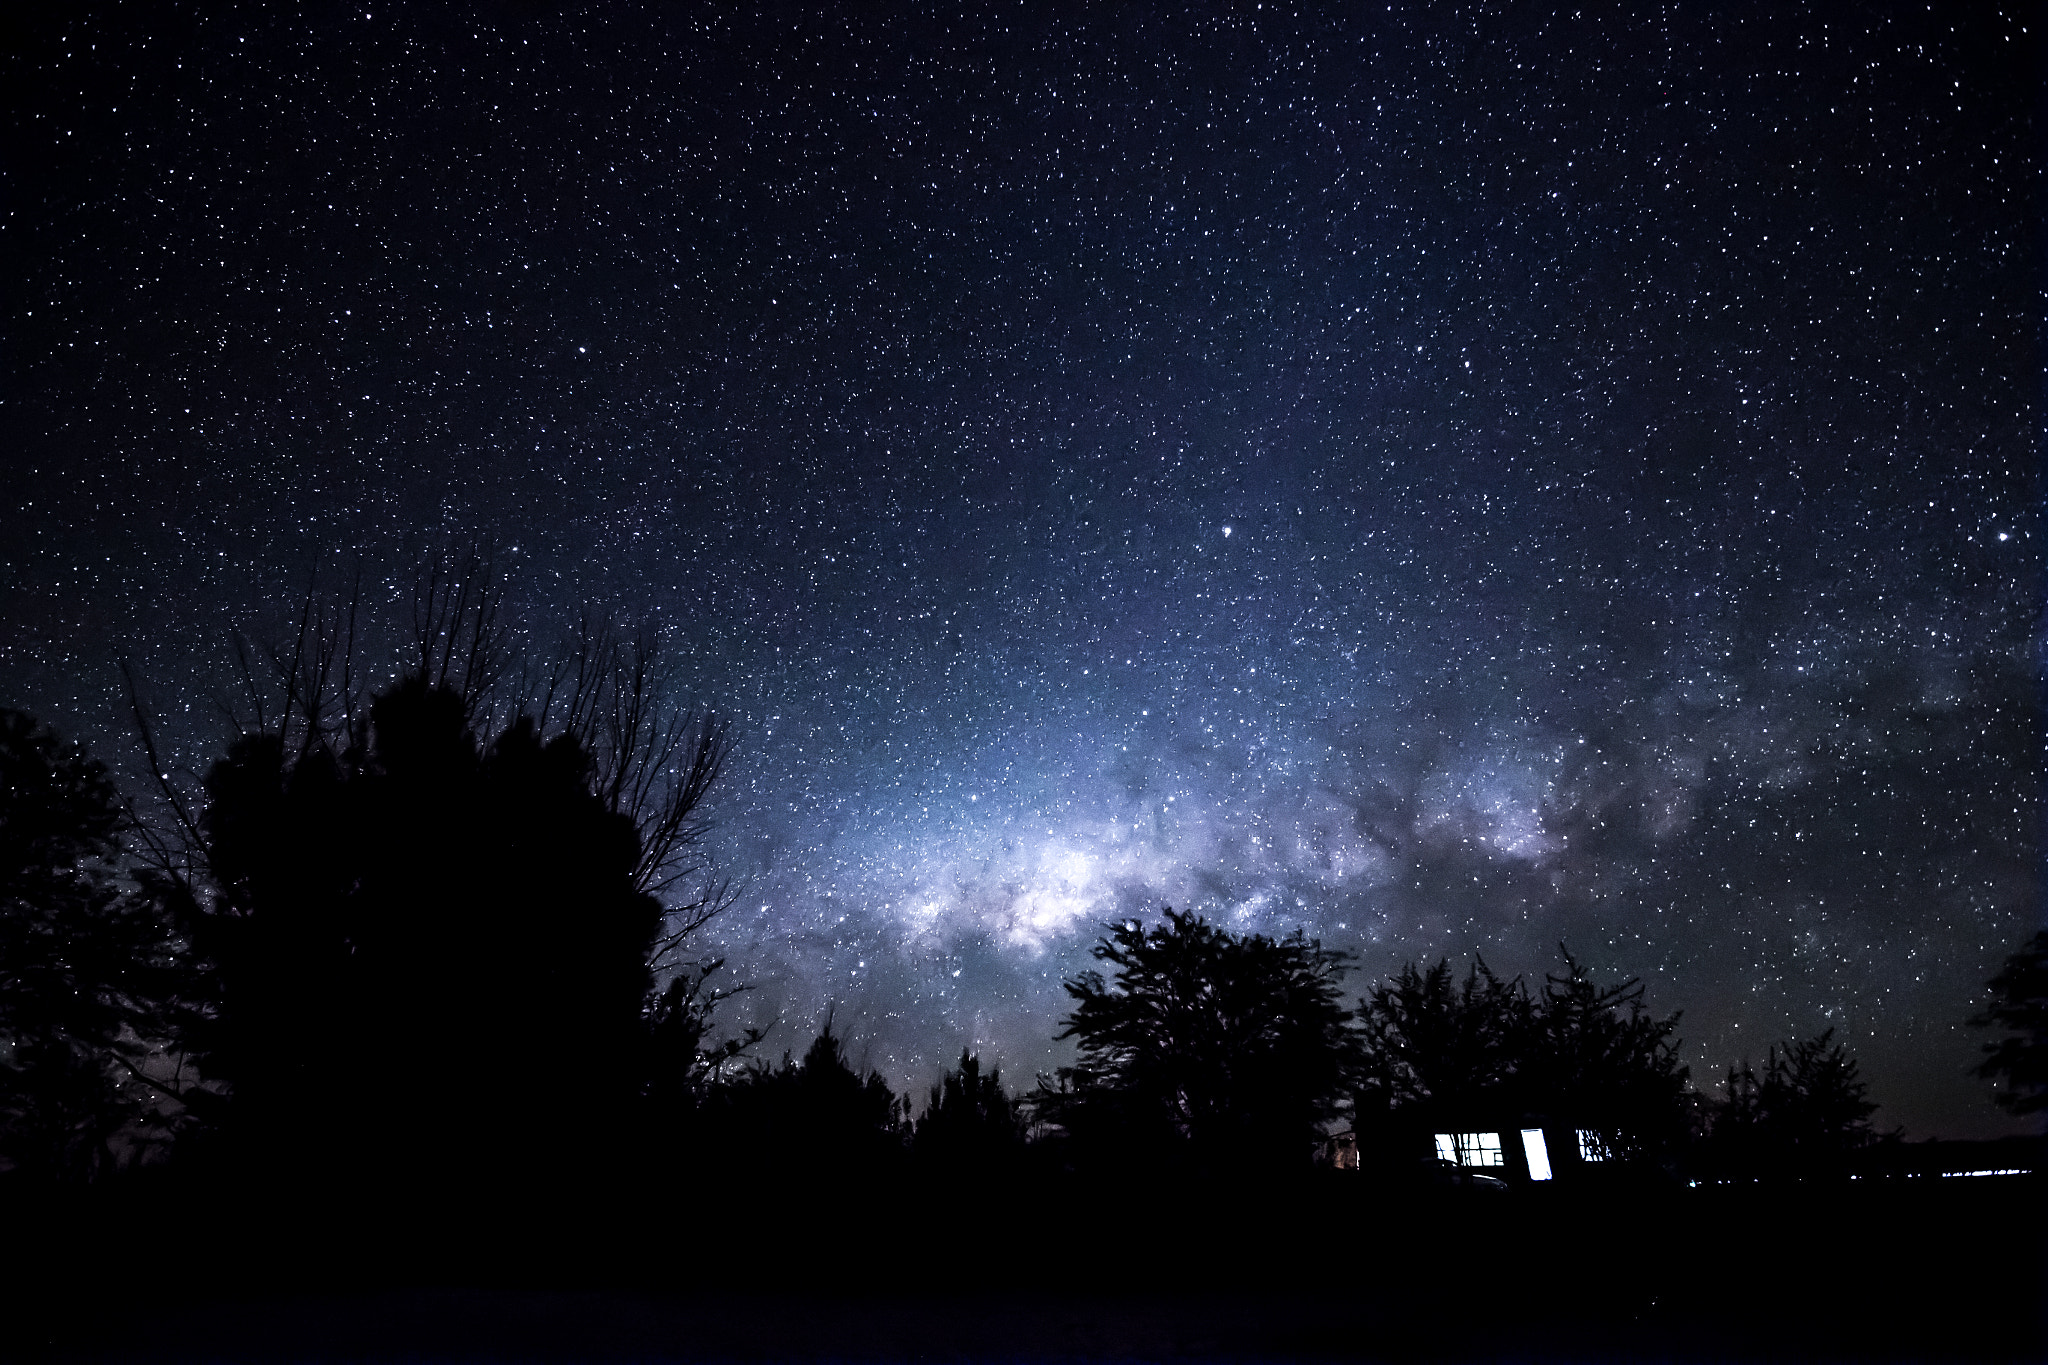 Tokina AT-X 11-20 F2.8 PRO DX Aspherical 11-20mm f/2.8 sample photo. The great milky way photography